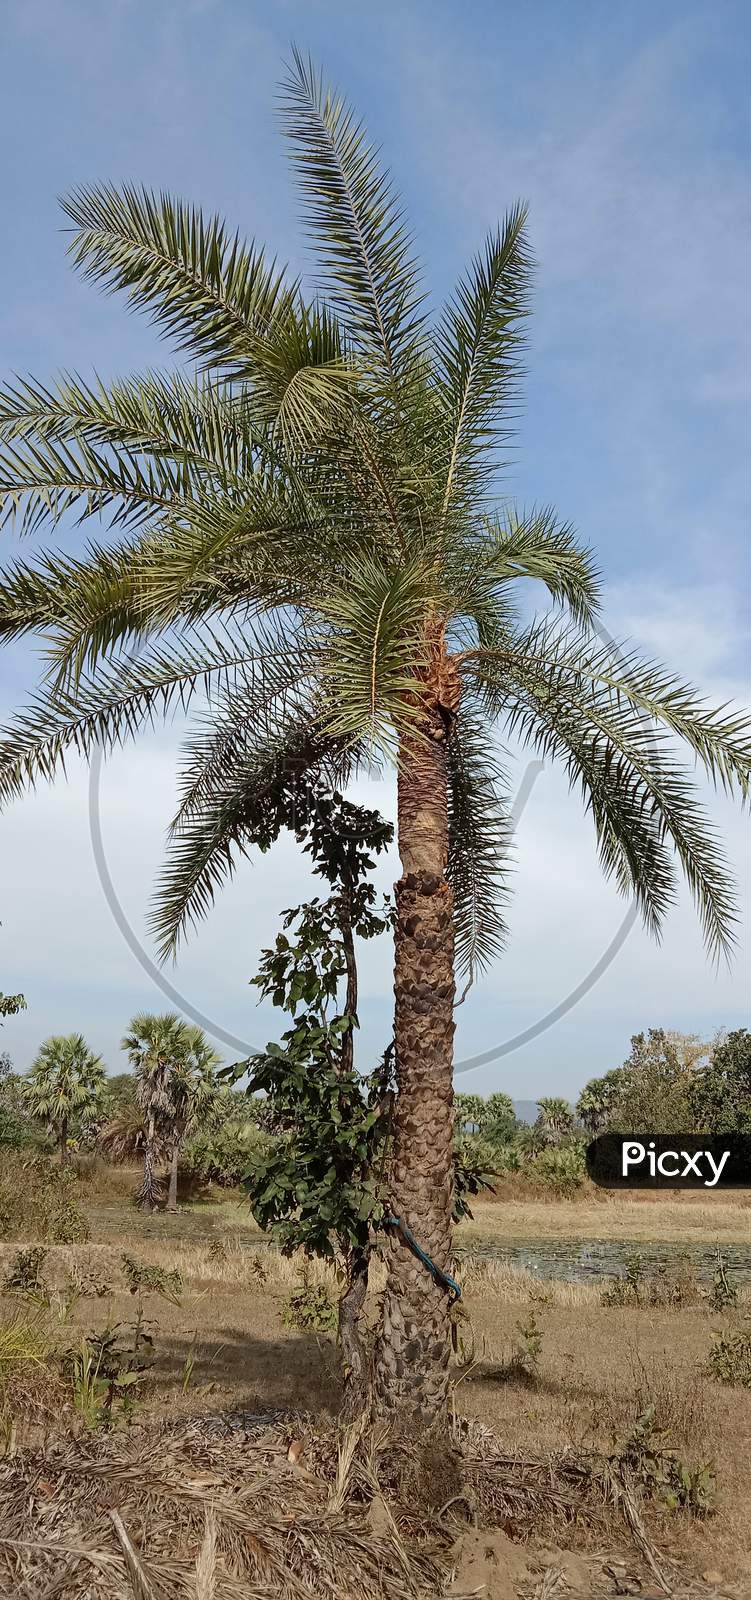 Palm tree preparing for get jucie from it